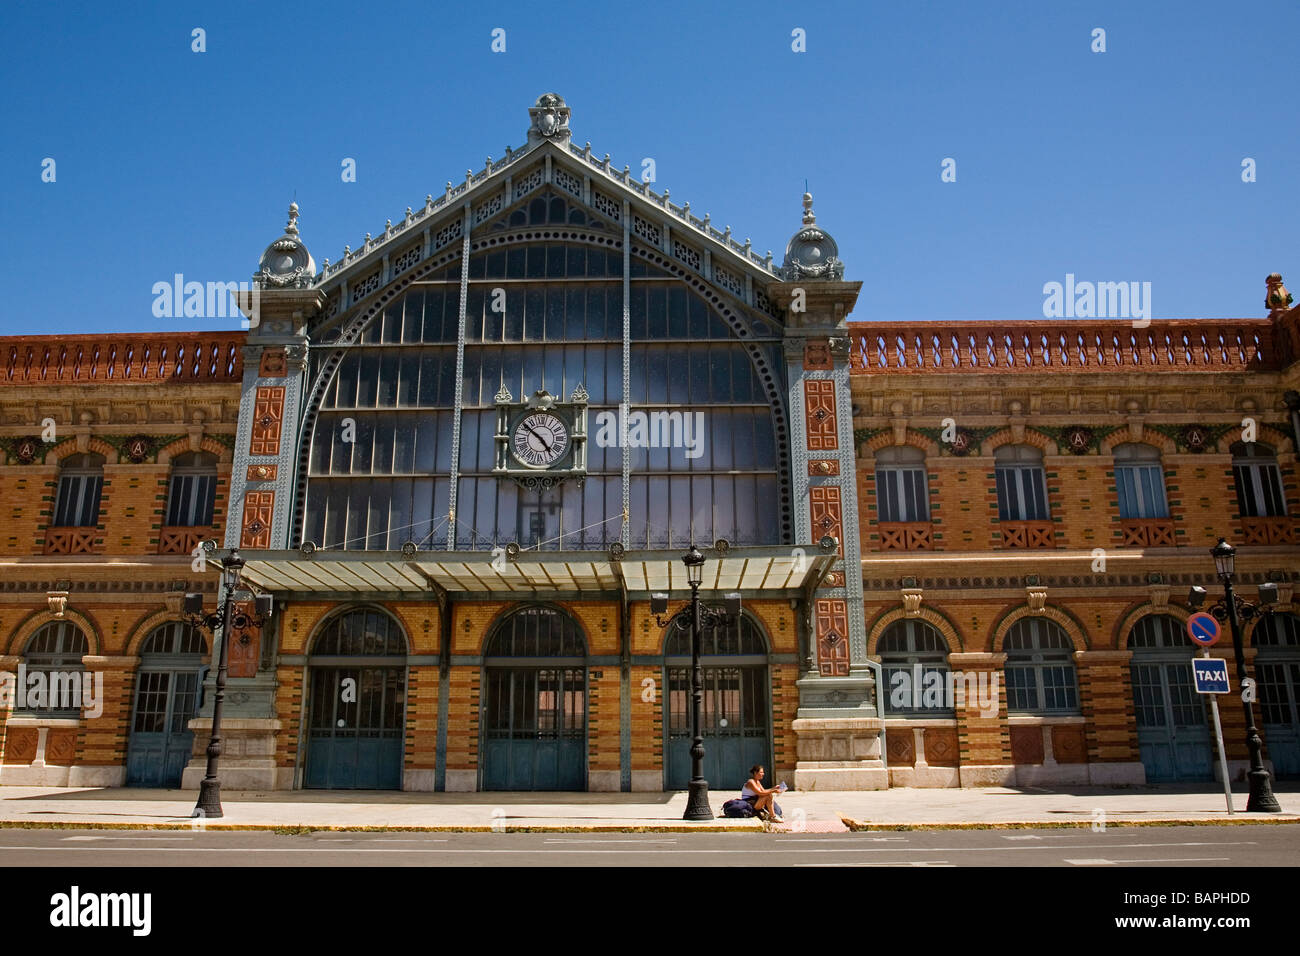 Old Railway Station Building in Nouveau Style Almeria Andalusia Spain Stock Photo